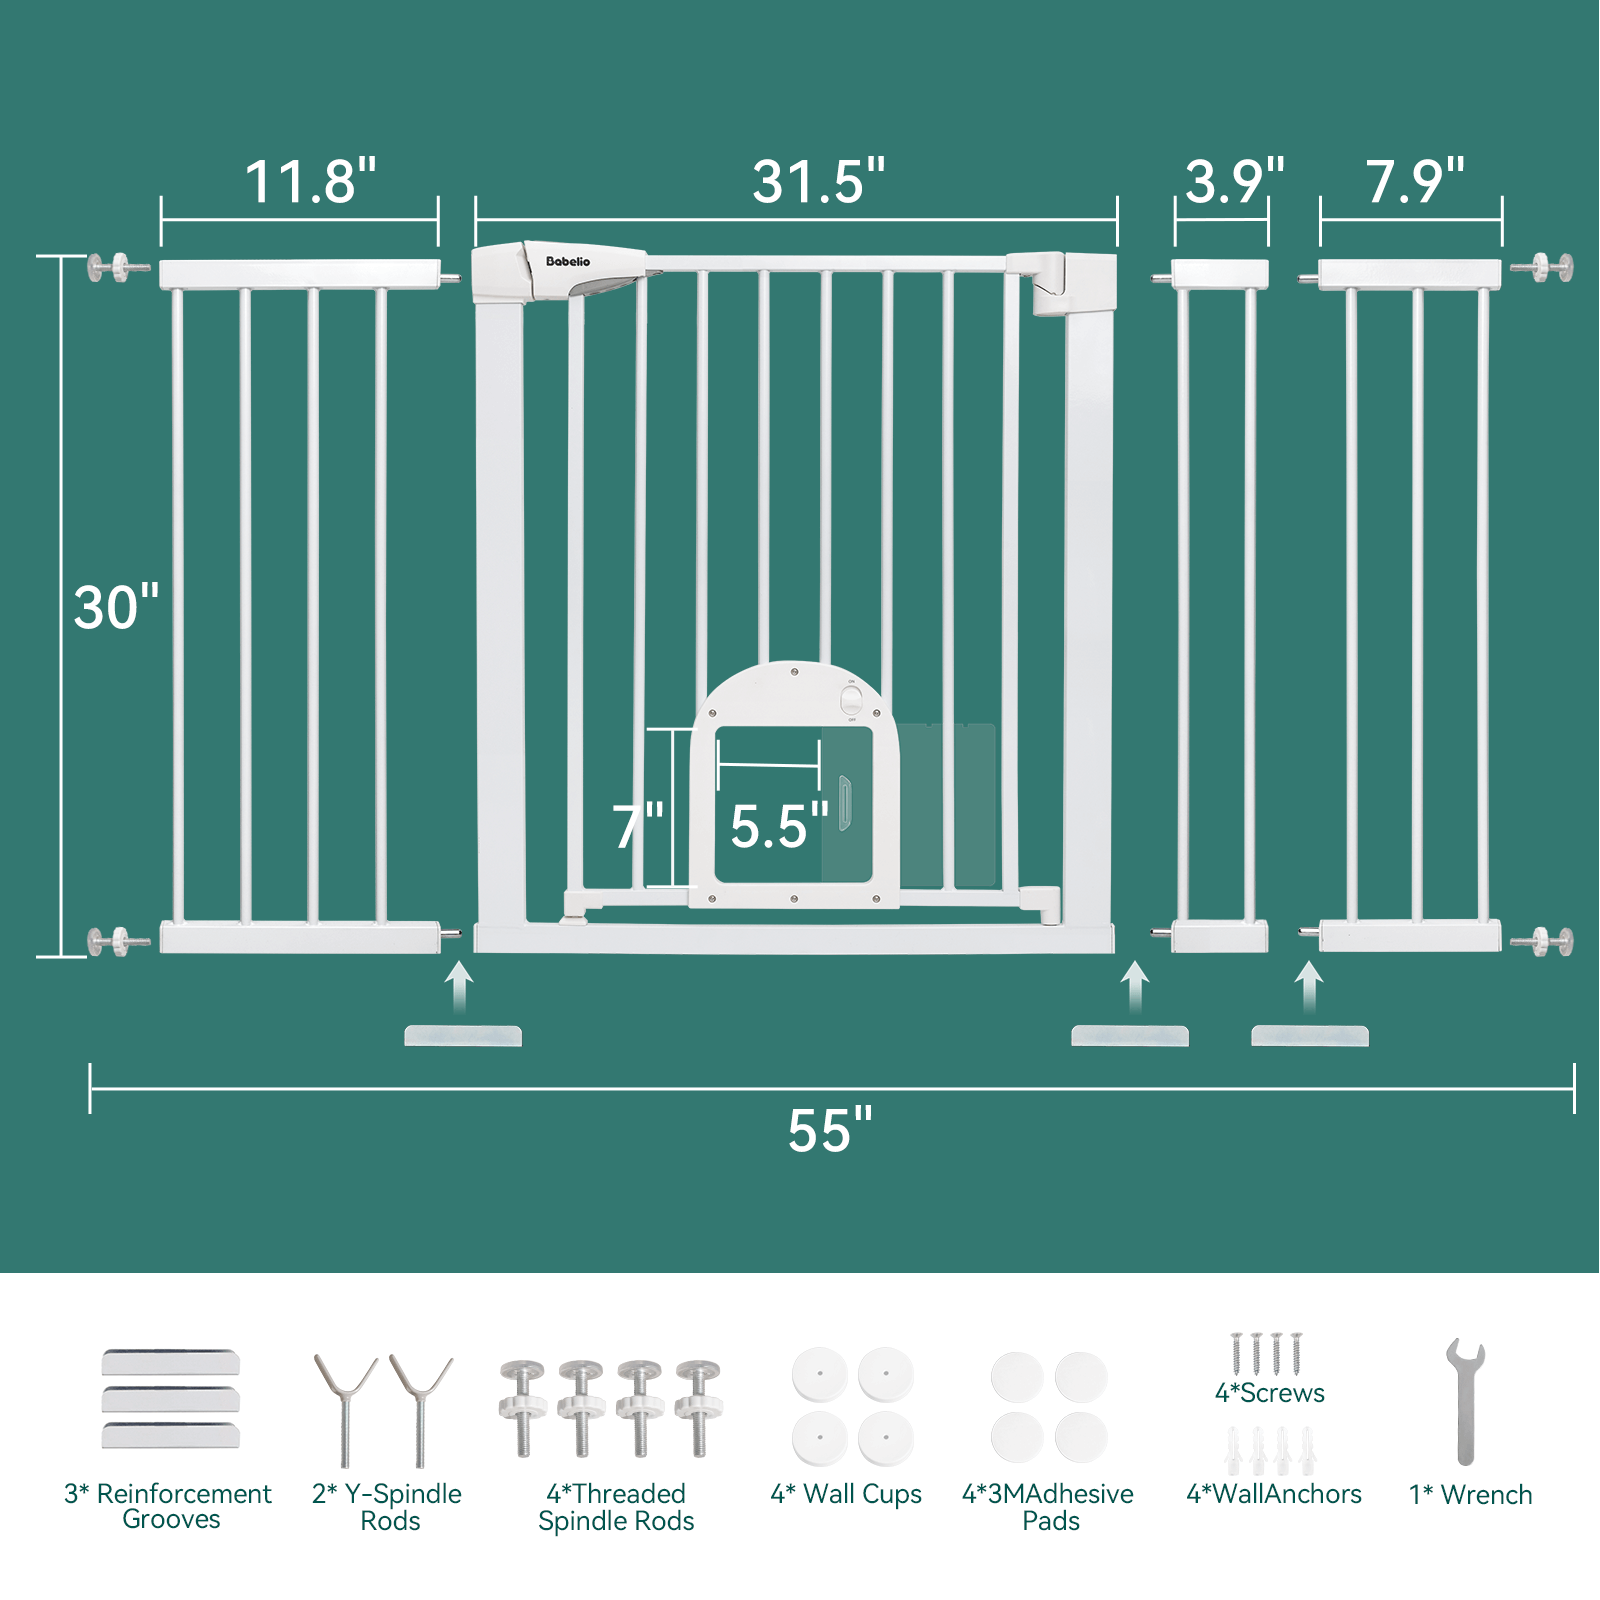 Babelio 31.5-55" Baby and Pet Gate with Cat Door, Auto-Close, Pressure-Mounted for Stairs and Doorways